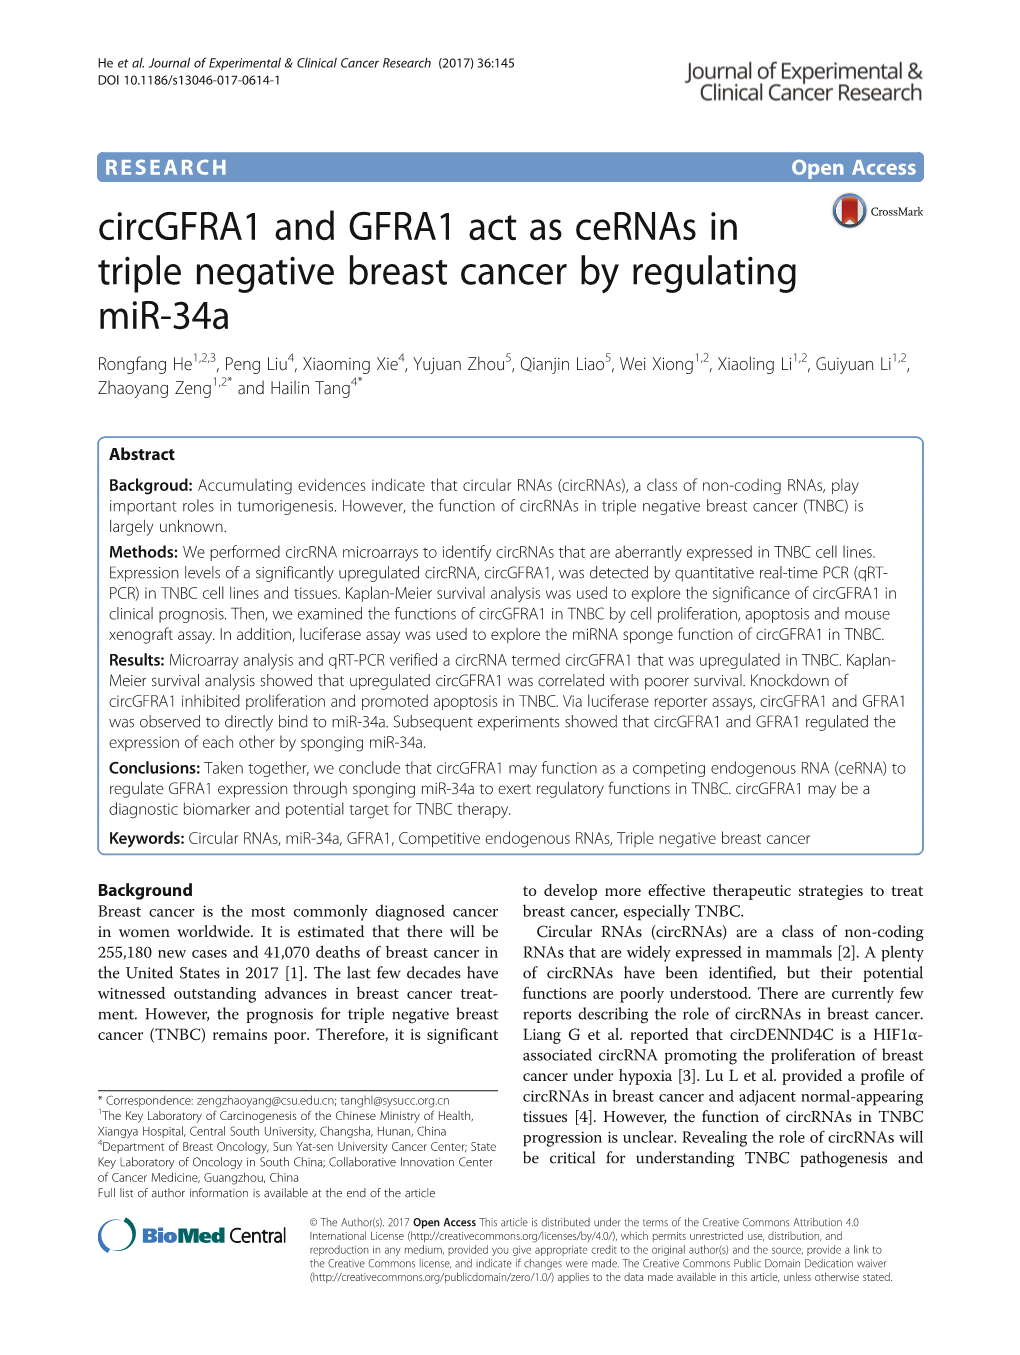 Circgfra1 and GFRA1 Act As Cernas in Triple Negative Breast Cancer By